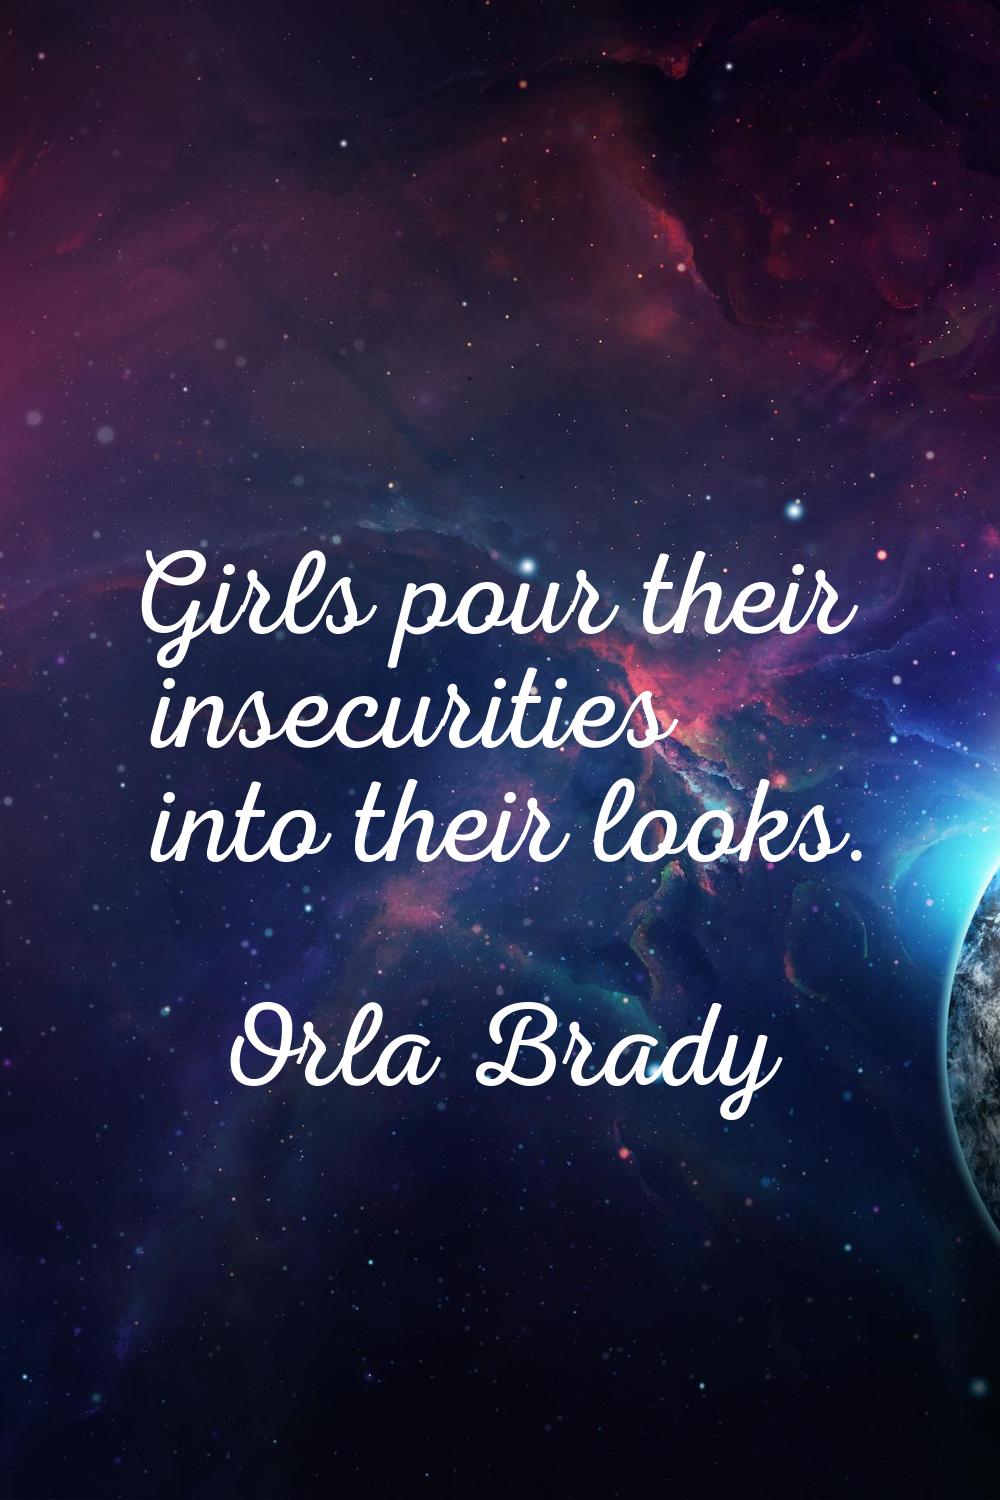 Girls pour their insecurities into their looks.